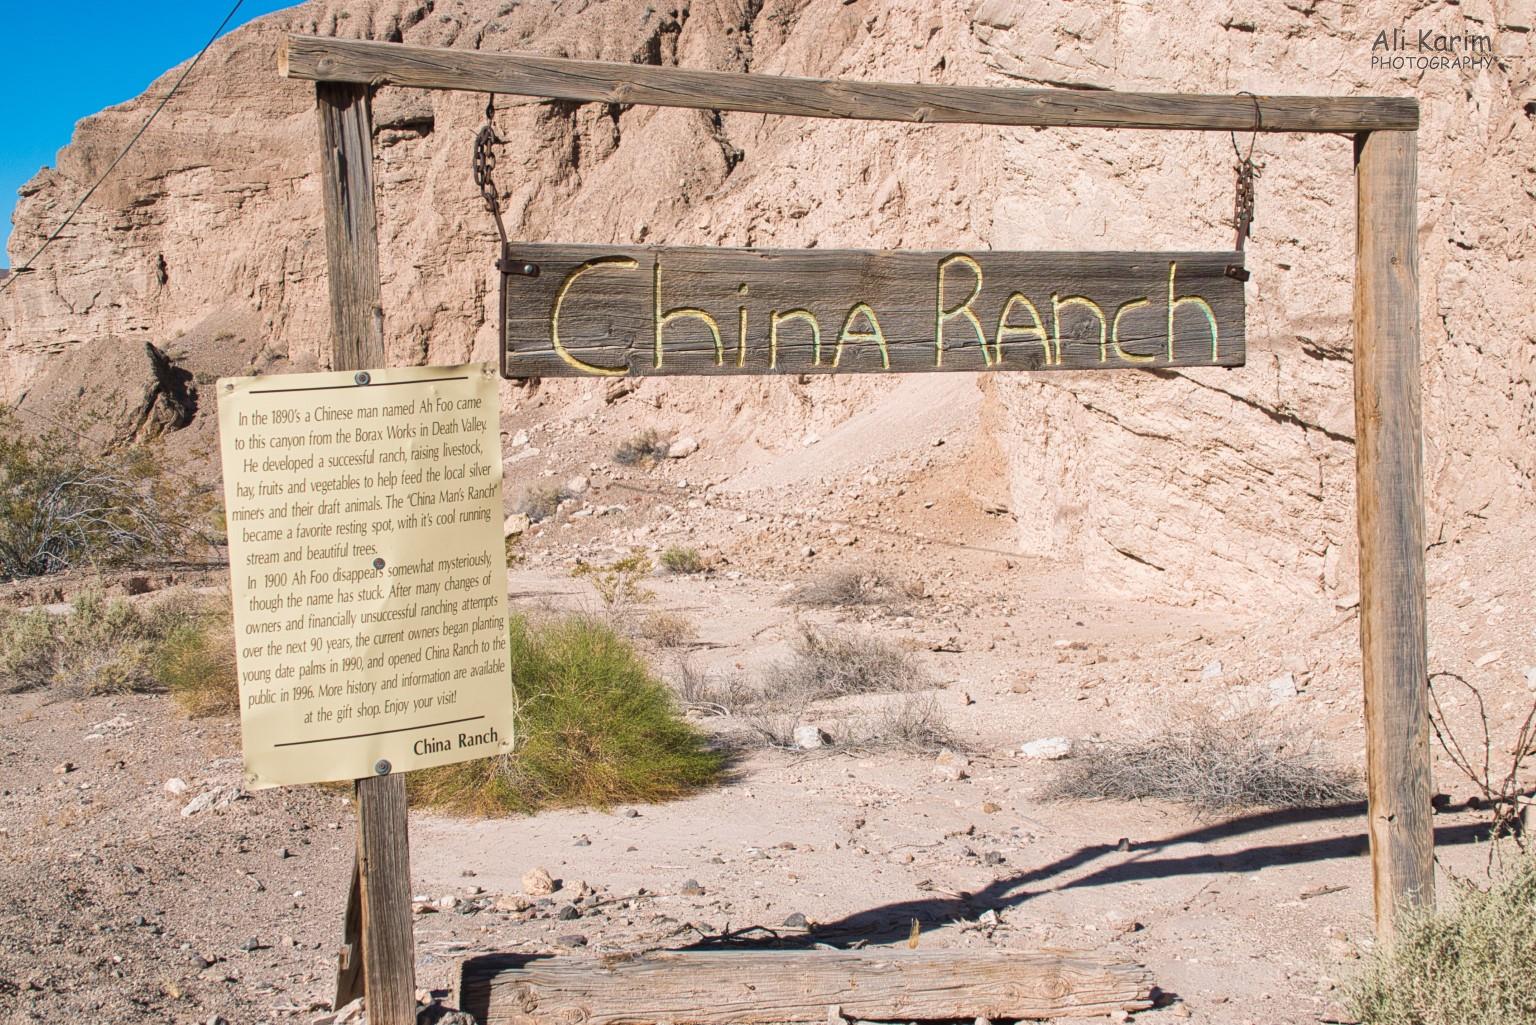 Death Valley National Park, June 2020, China Ranch story